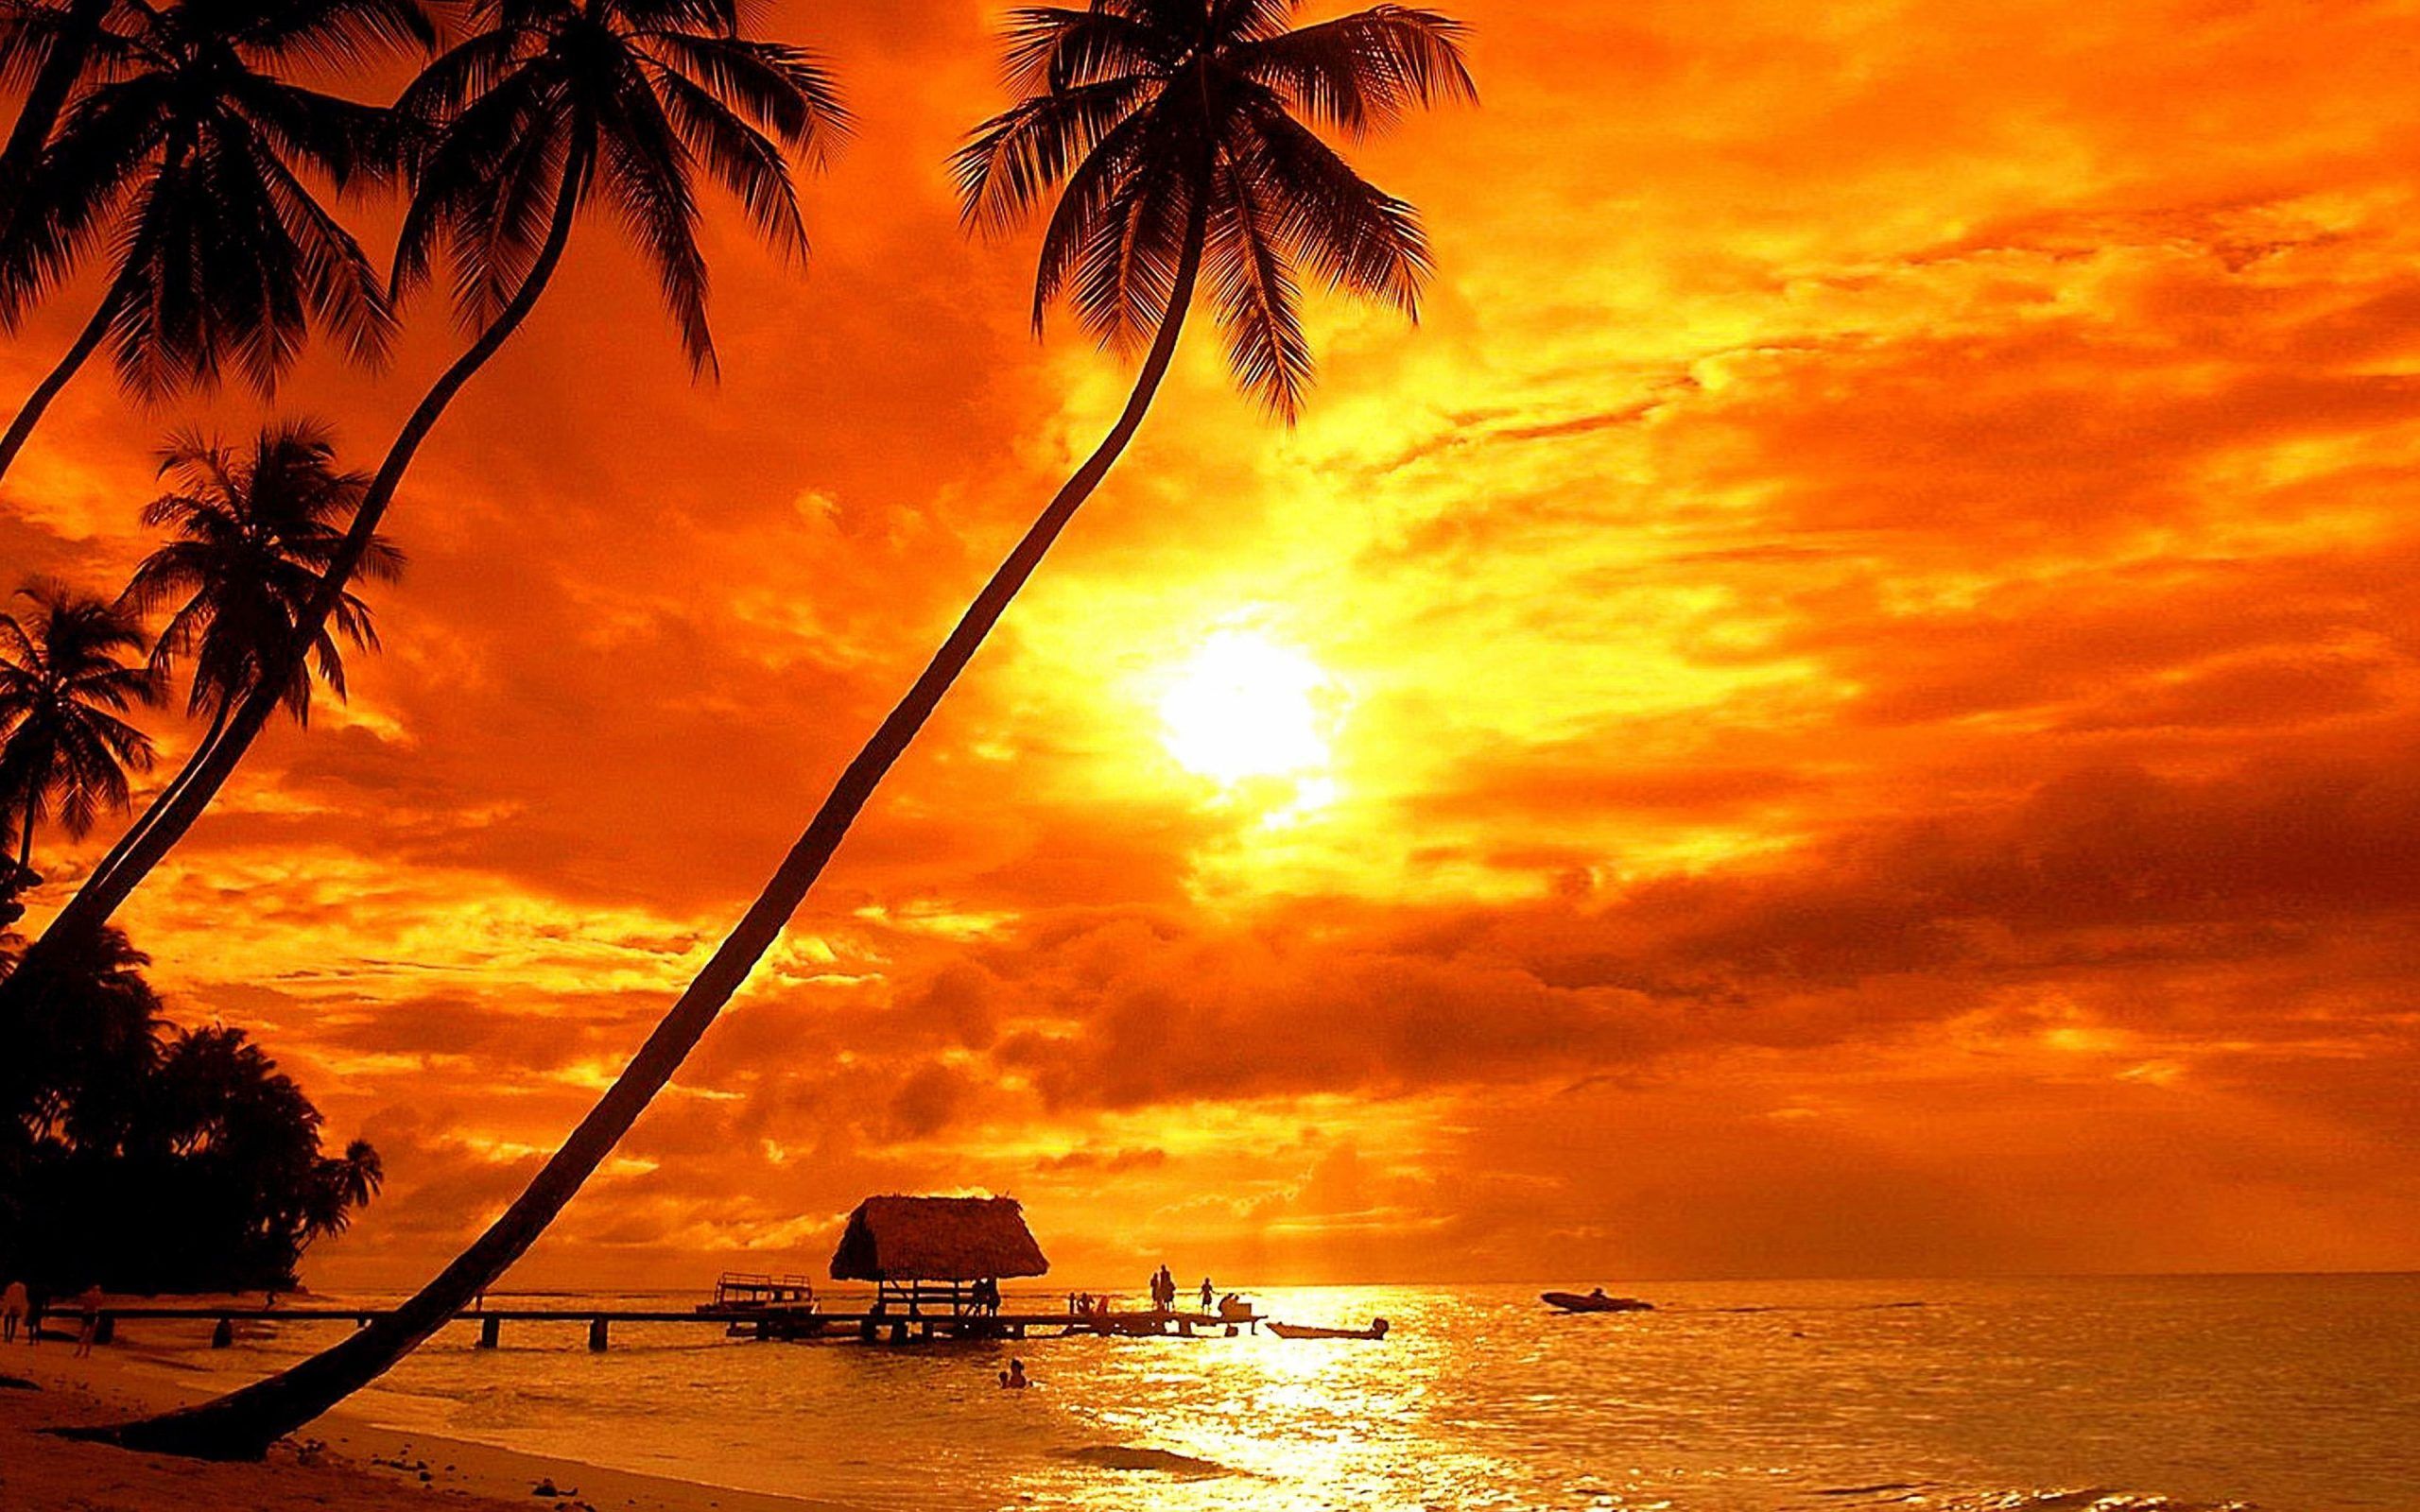 Bora Bora Tropical Sunset Beach Palm Trees Red Sky Clouds Ultra HD 4k Wallpaper For Desktop Laptop Tablet Mobile Phones And Tv 3840х2400 • Wallpaper For You